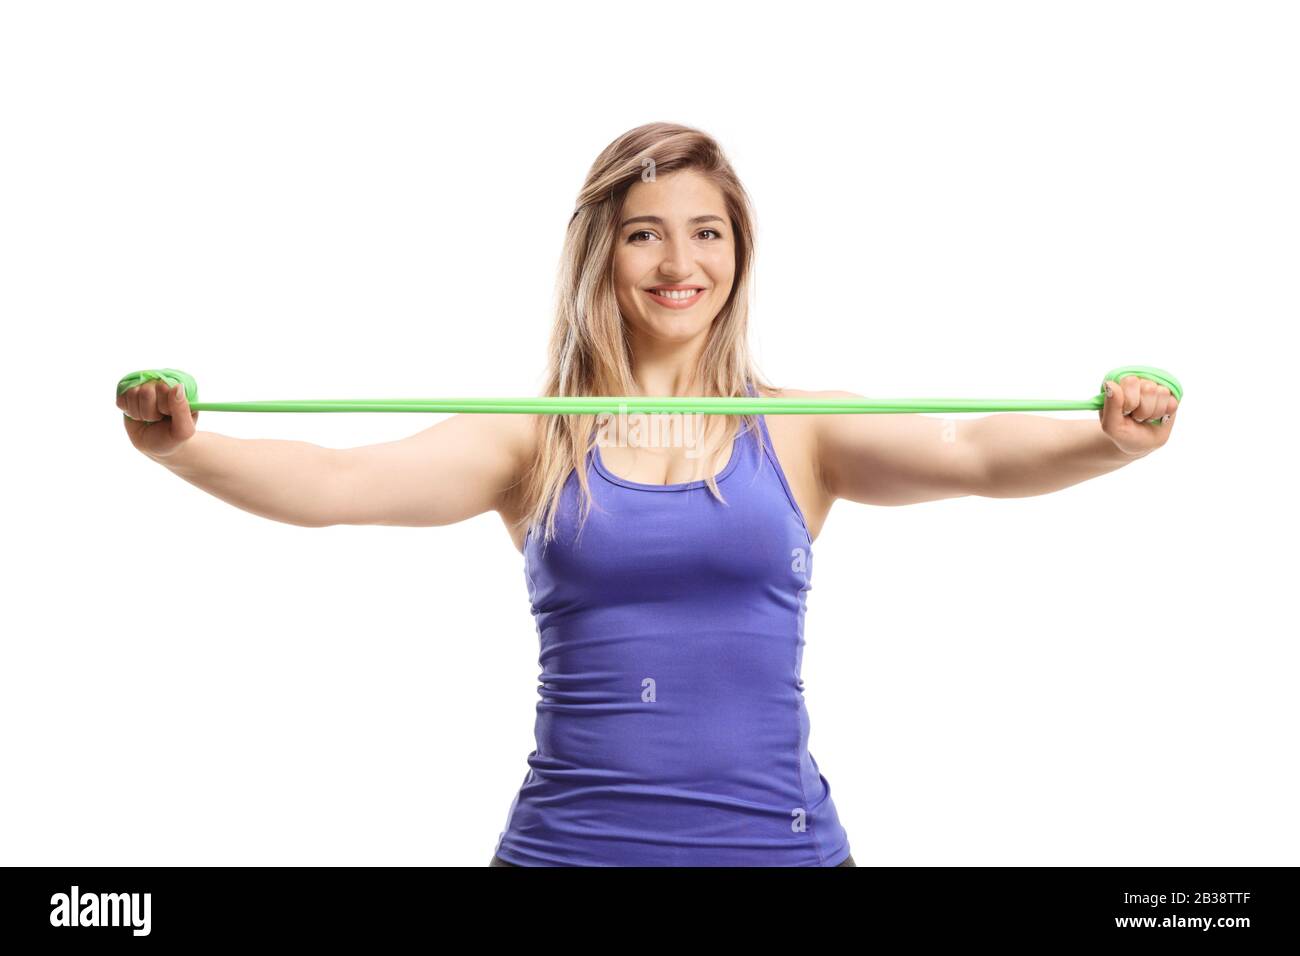 Smiling woman exercising with a stretching band isolated on white background Stock Photo